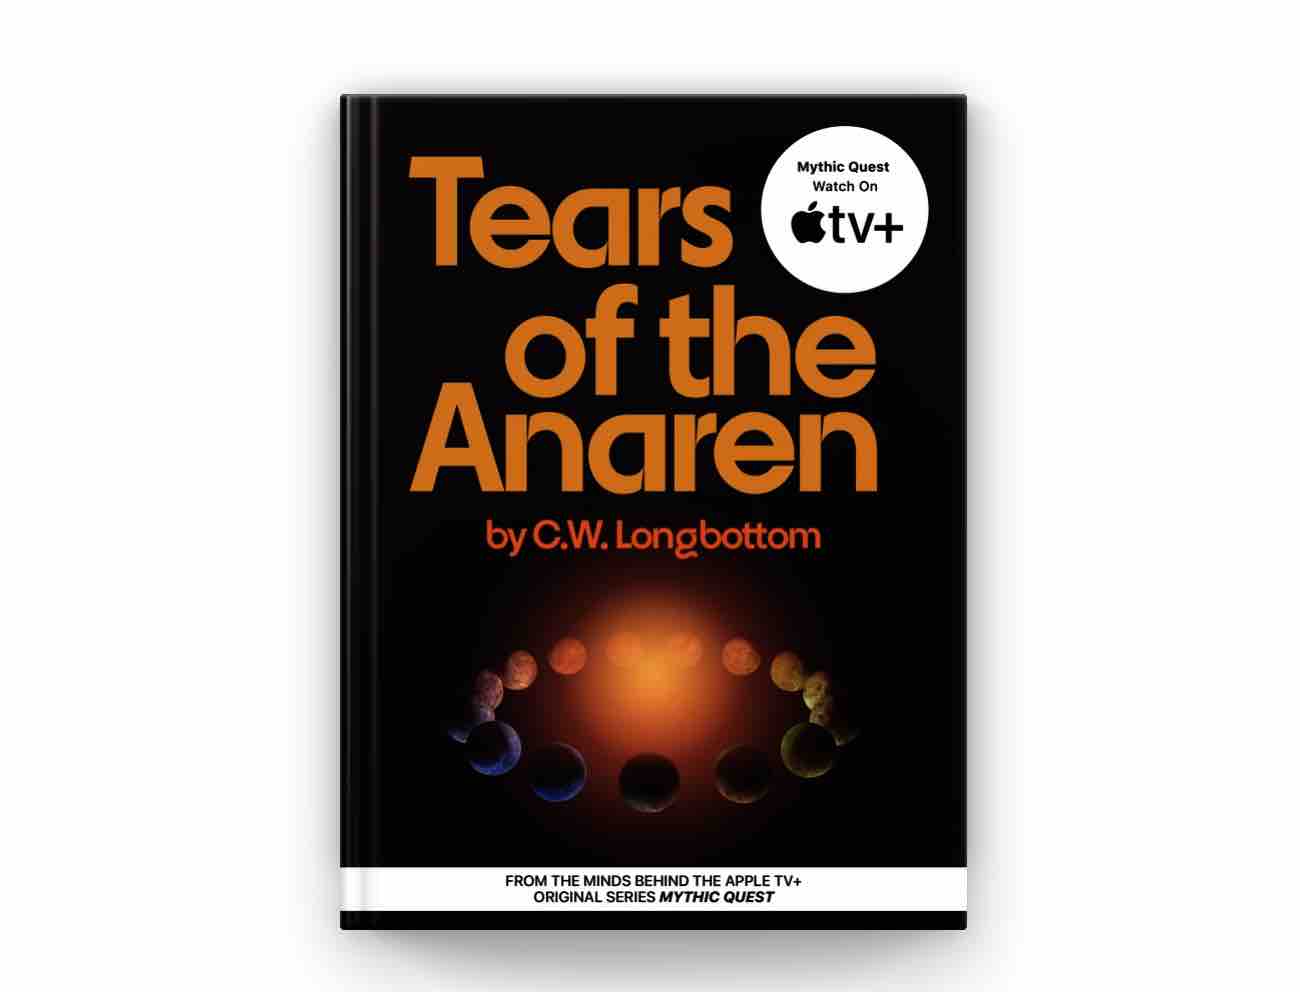 IMAGE(https://www.imore.com/sites/imore.com/files/styles/larger/public/field/image/2021/06/tears-of-the-anaren.jpg)